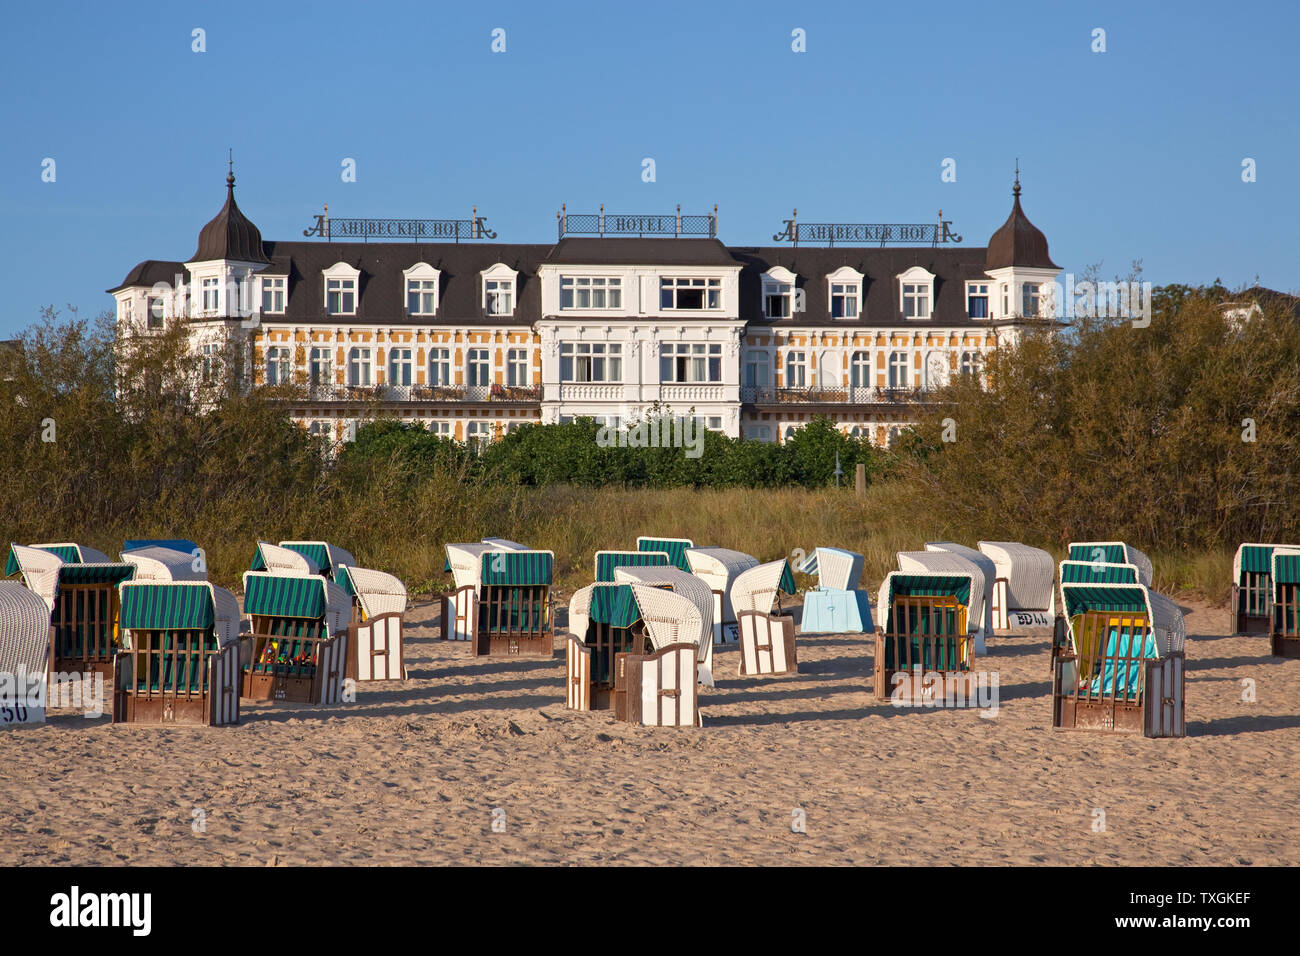 geography / travel, Germany, Mecklenburg-West Pomerania, hotel Ahlbecker yard in the Baltic sea spa A, Additional-Rights-Clearance-Info-Not-Available Stock Photo